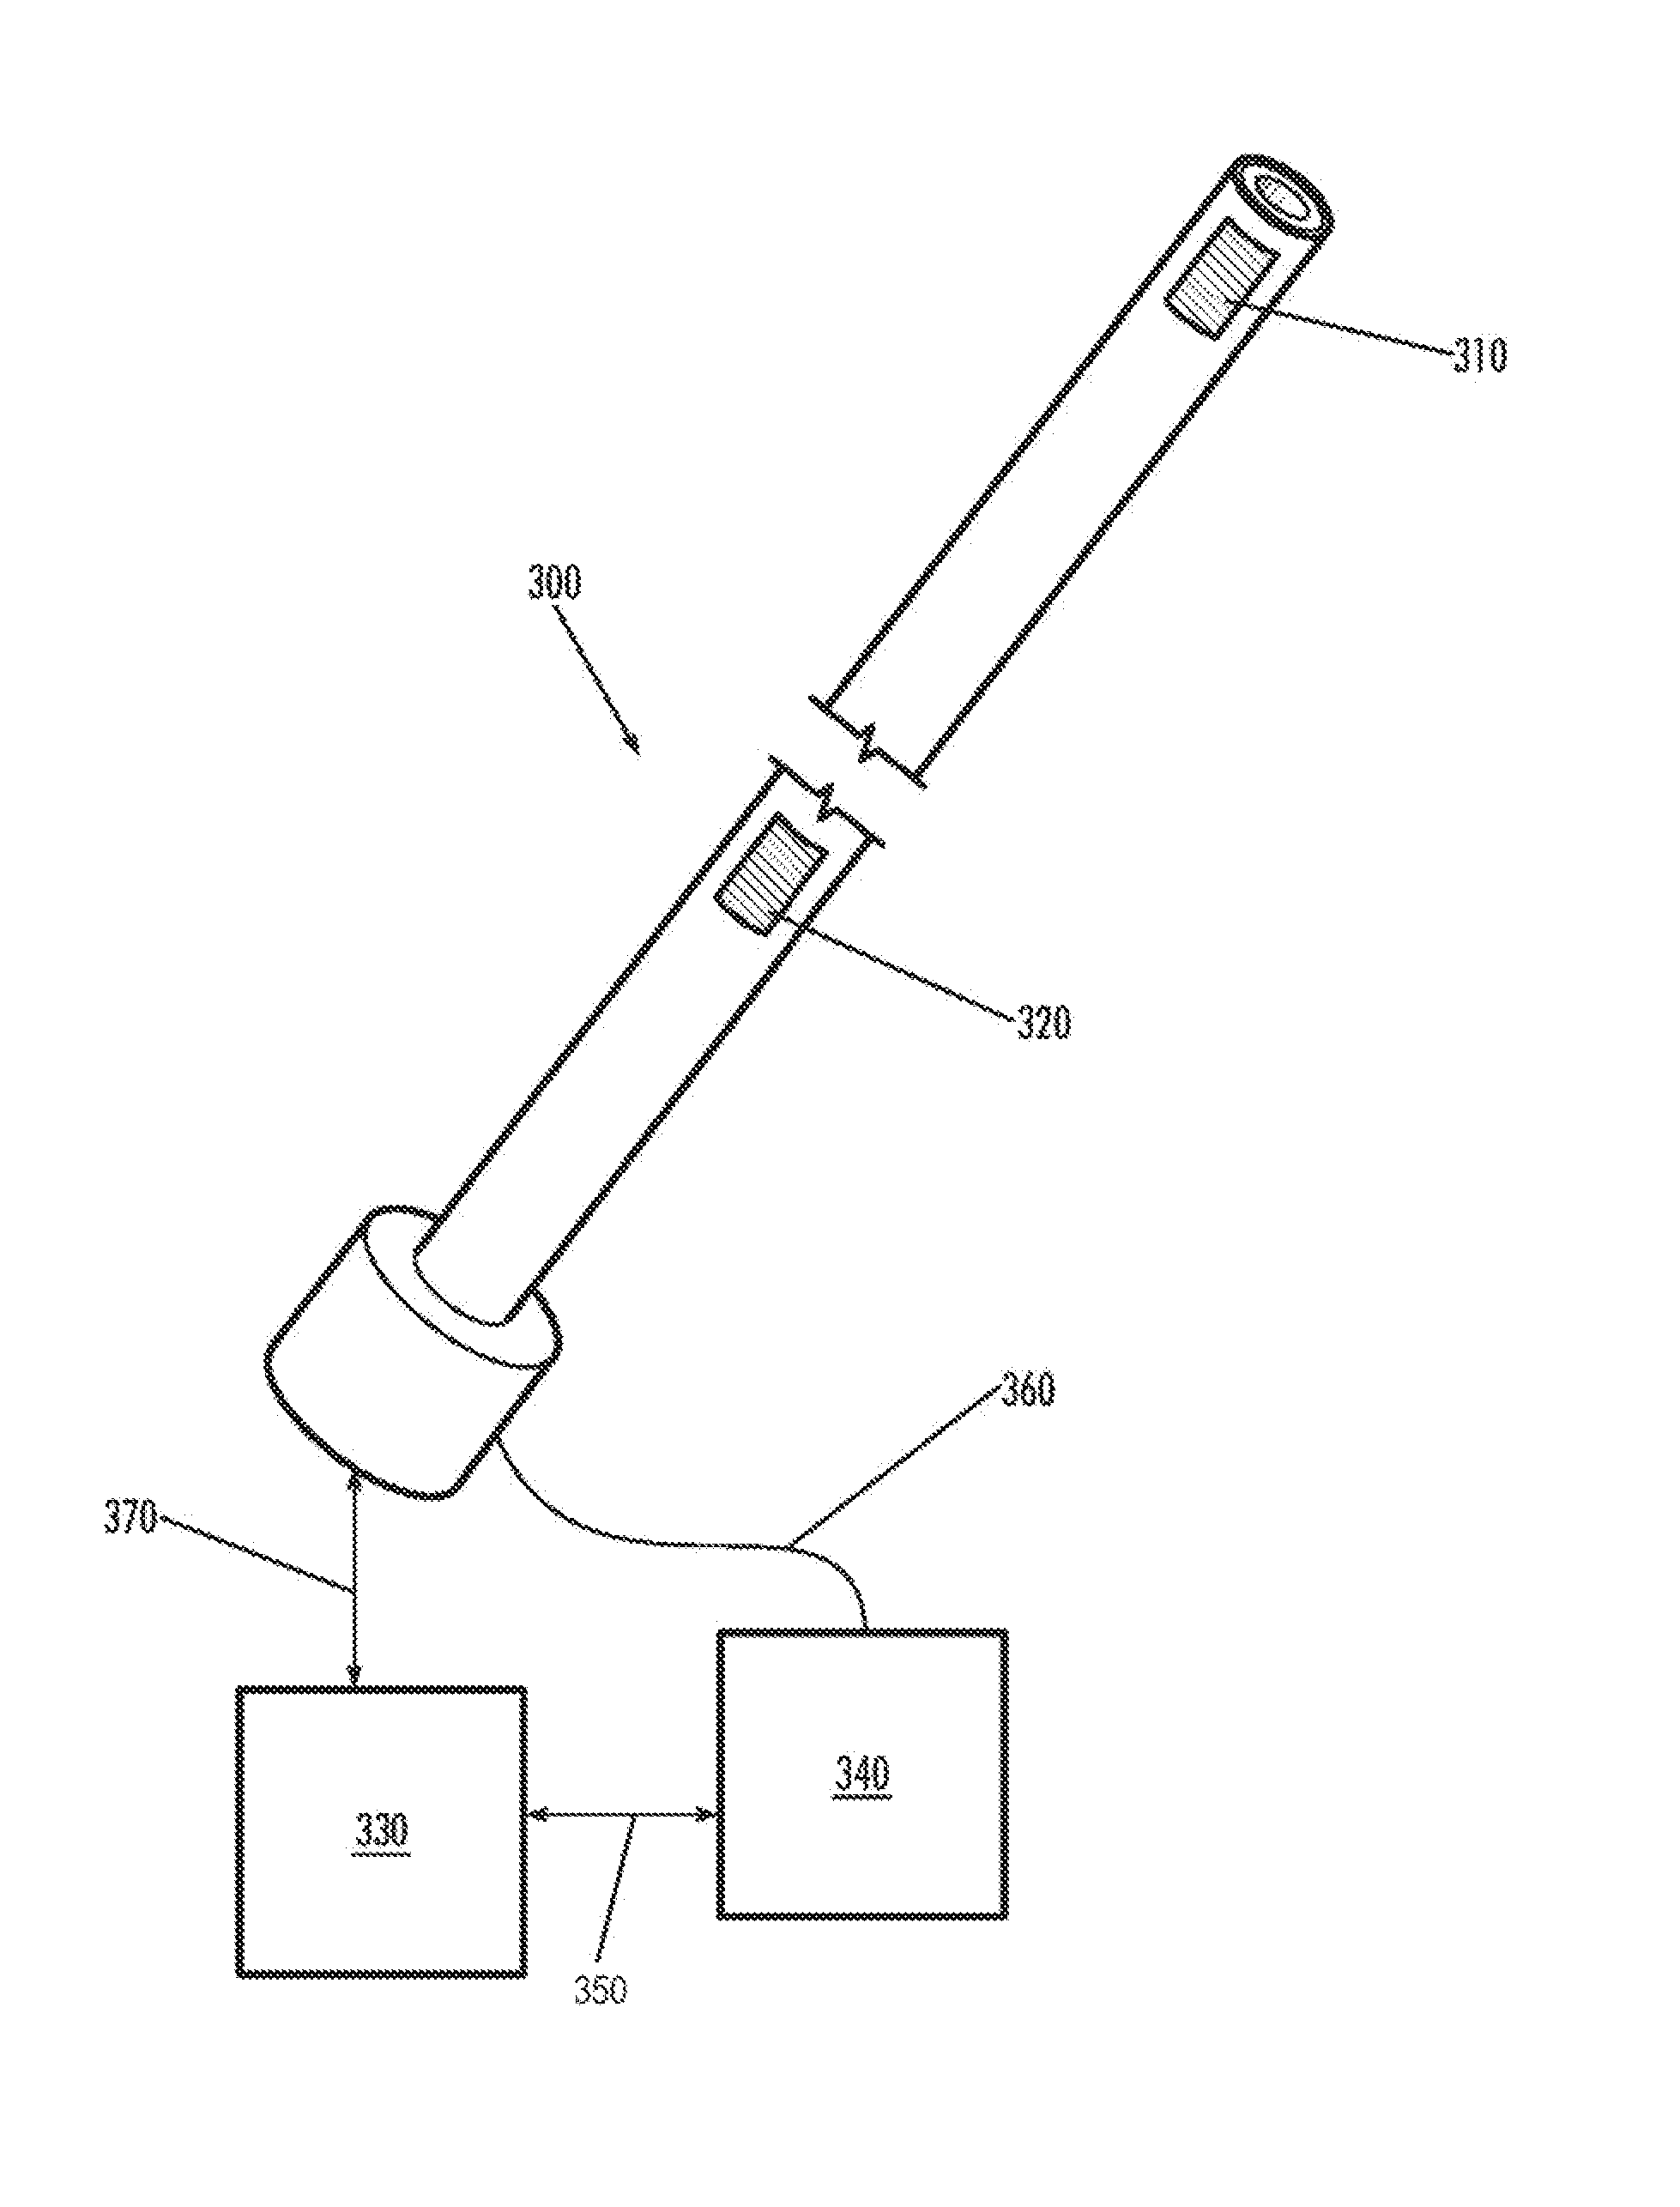 Intravascular cerebral catheter device and method of use